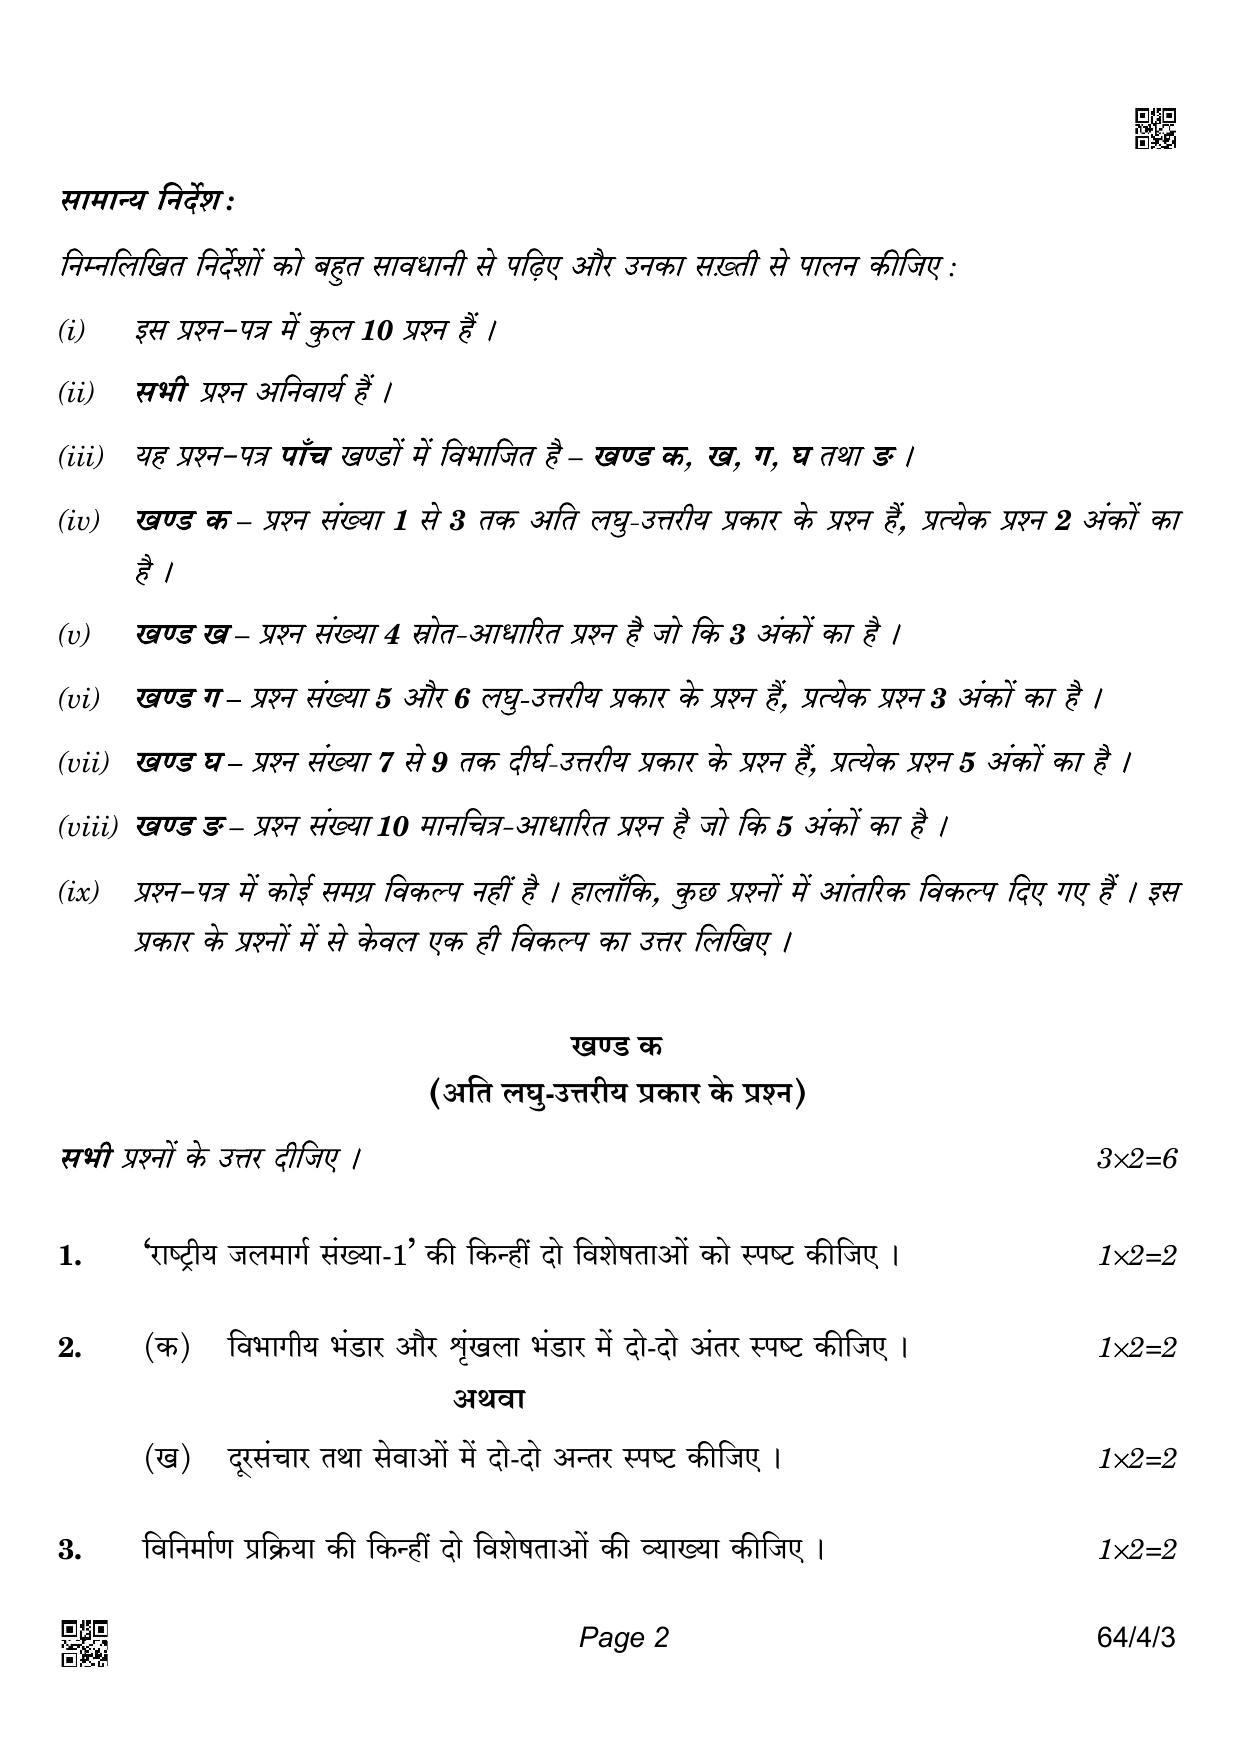 CBSE Class 12 64-4-3 Geography 2022 Question Paper - Page 2